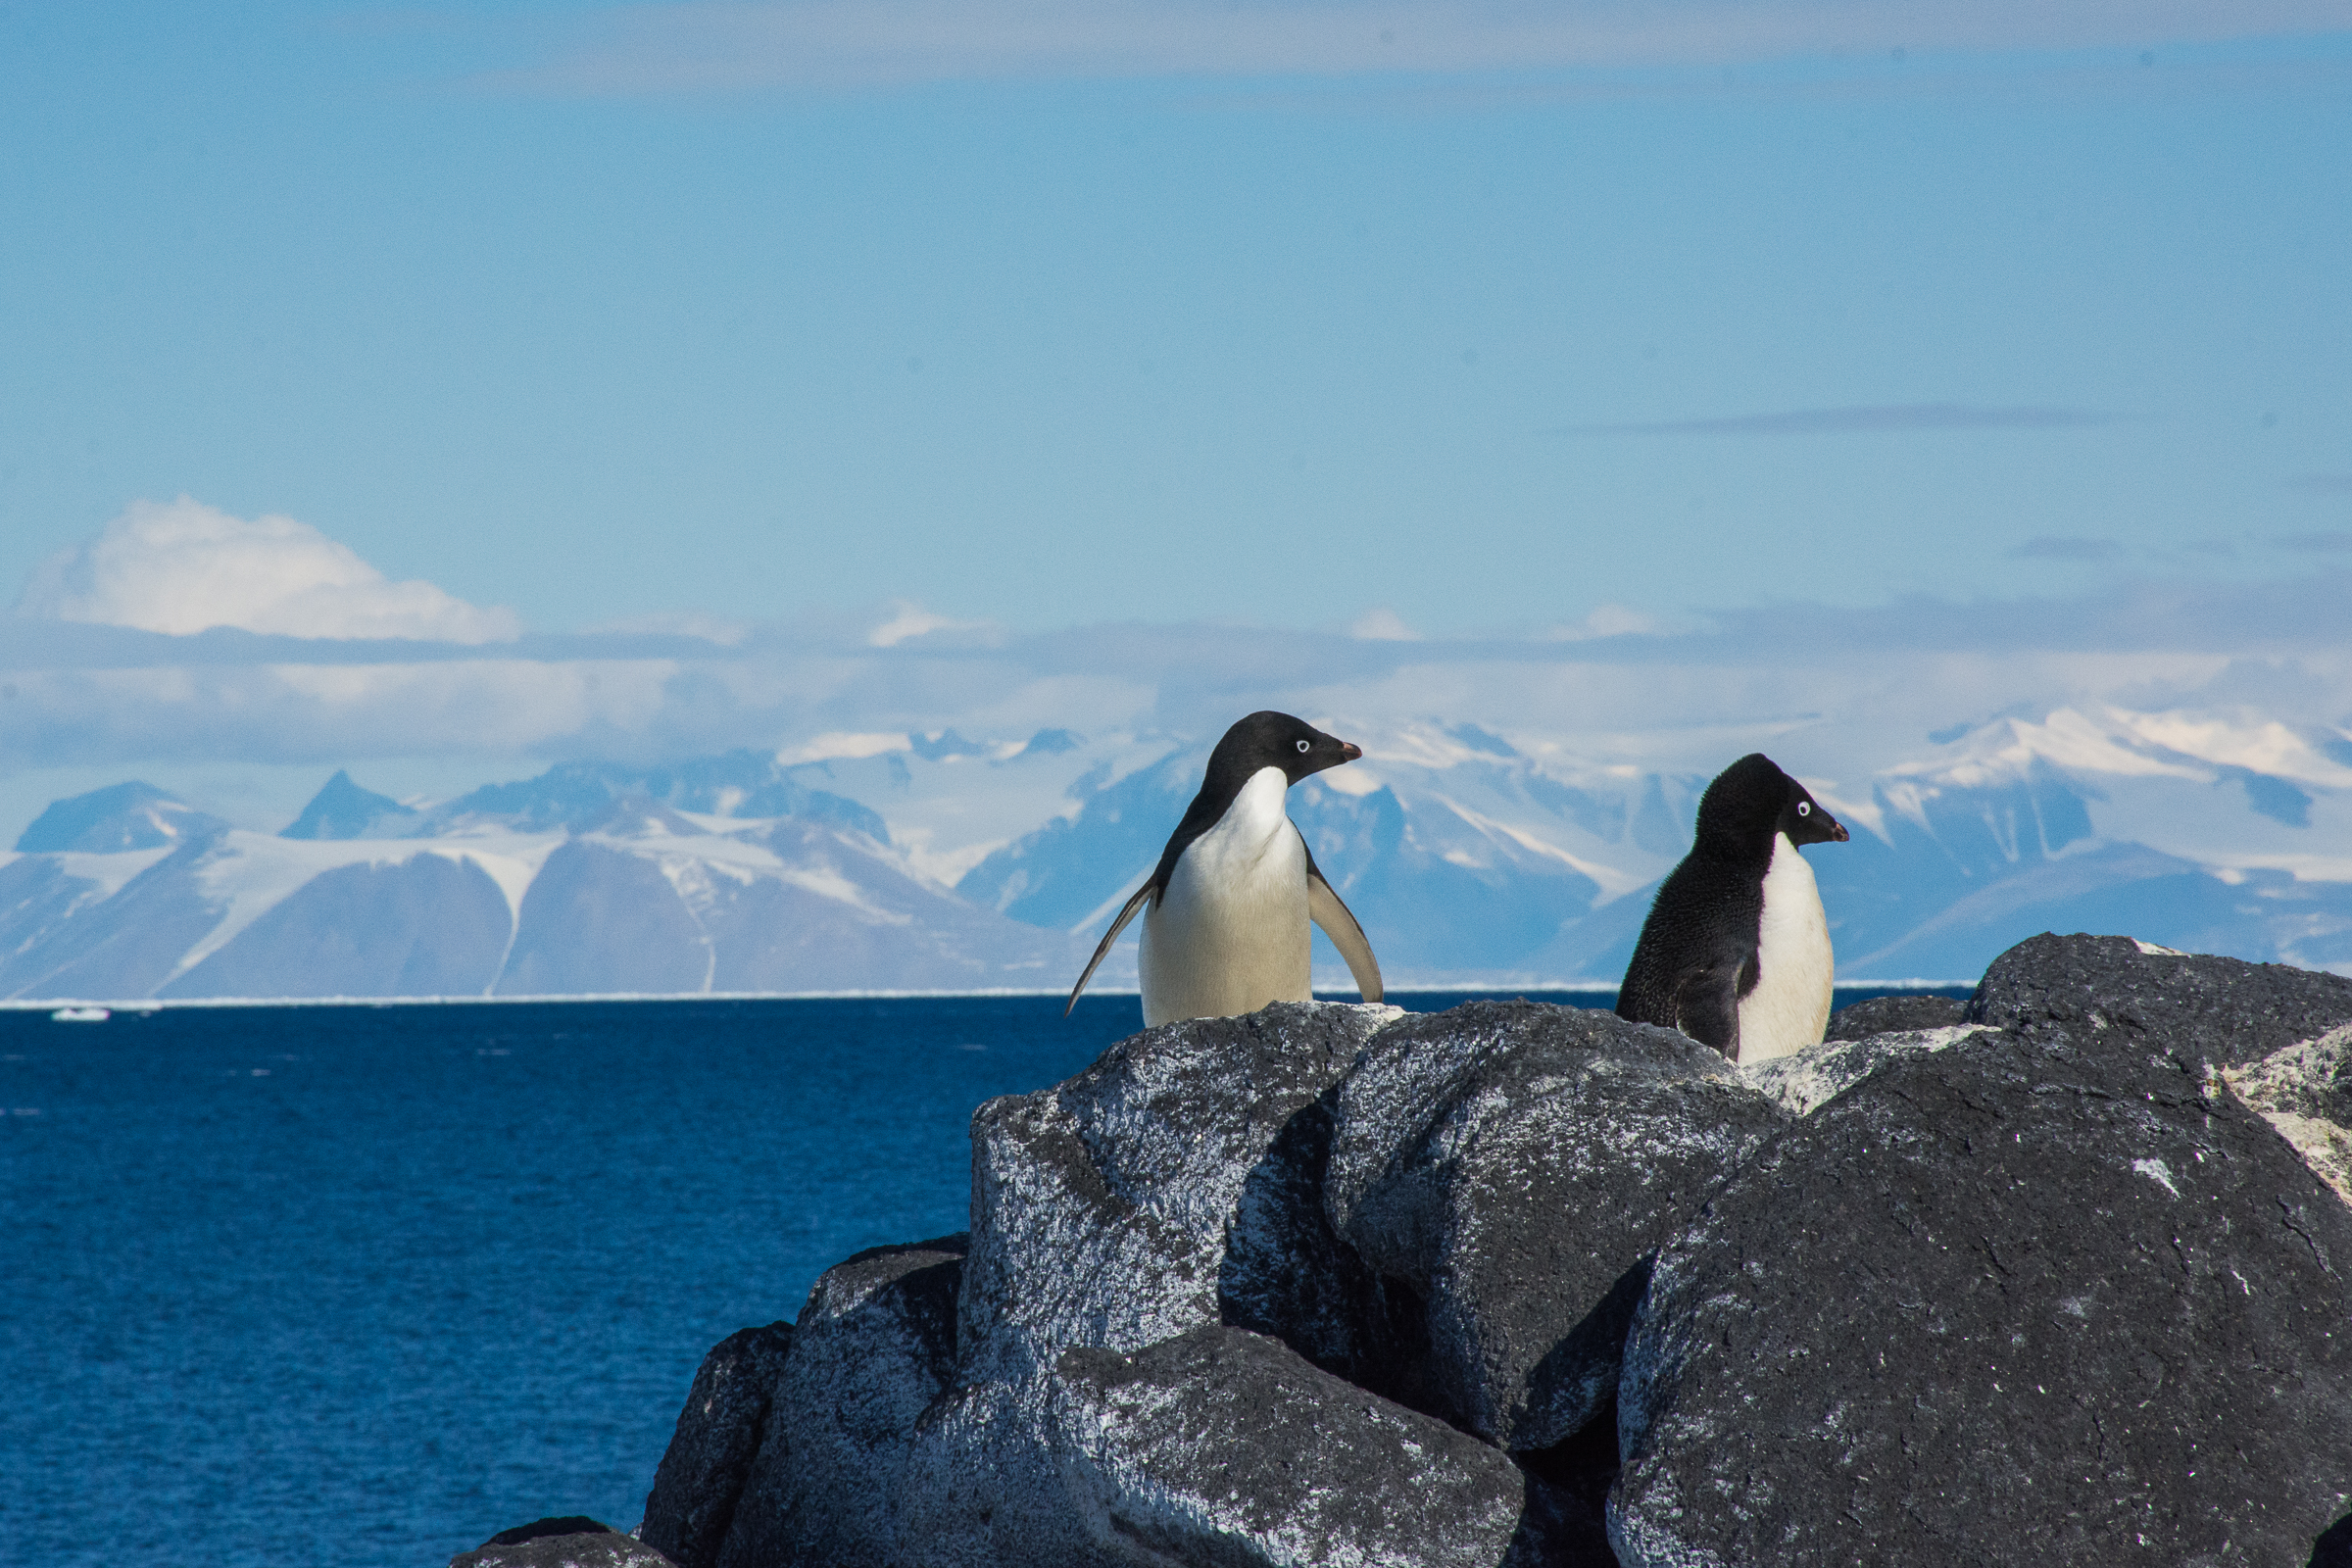 Penguins stand on rocks overlooking ocean and mountains.